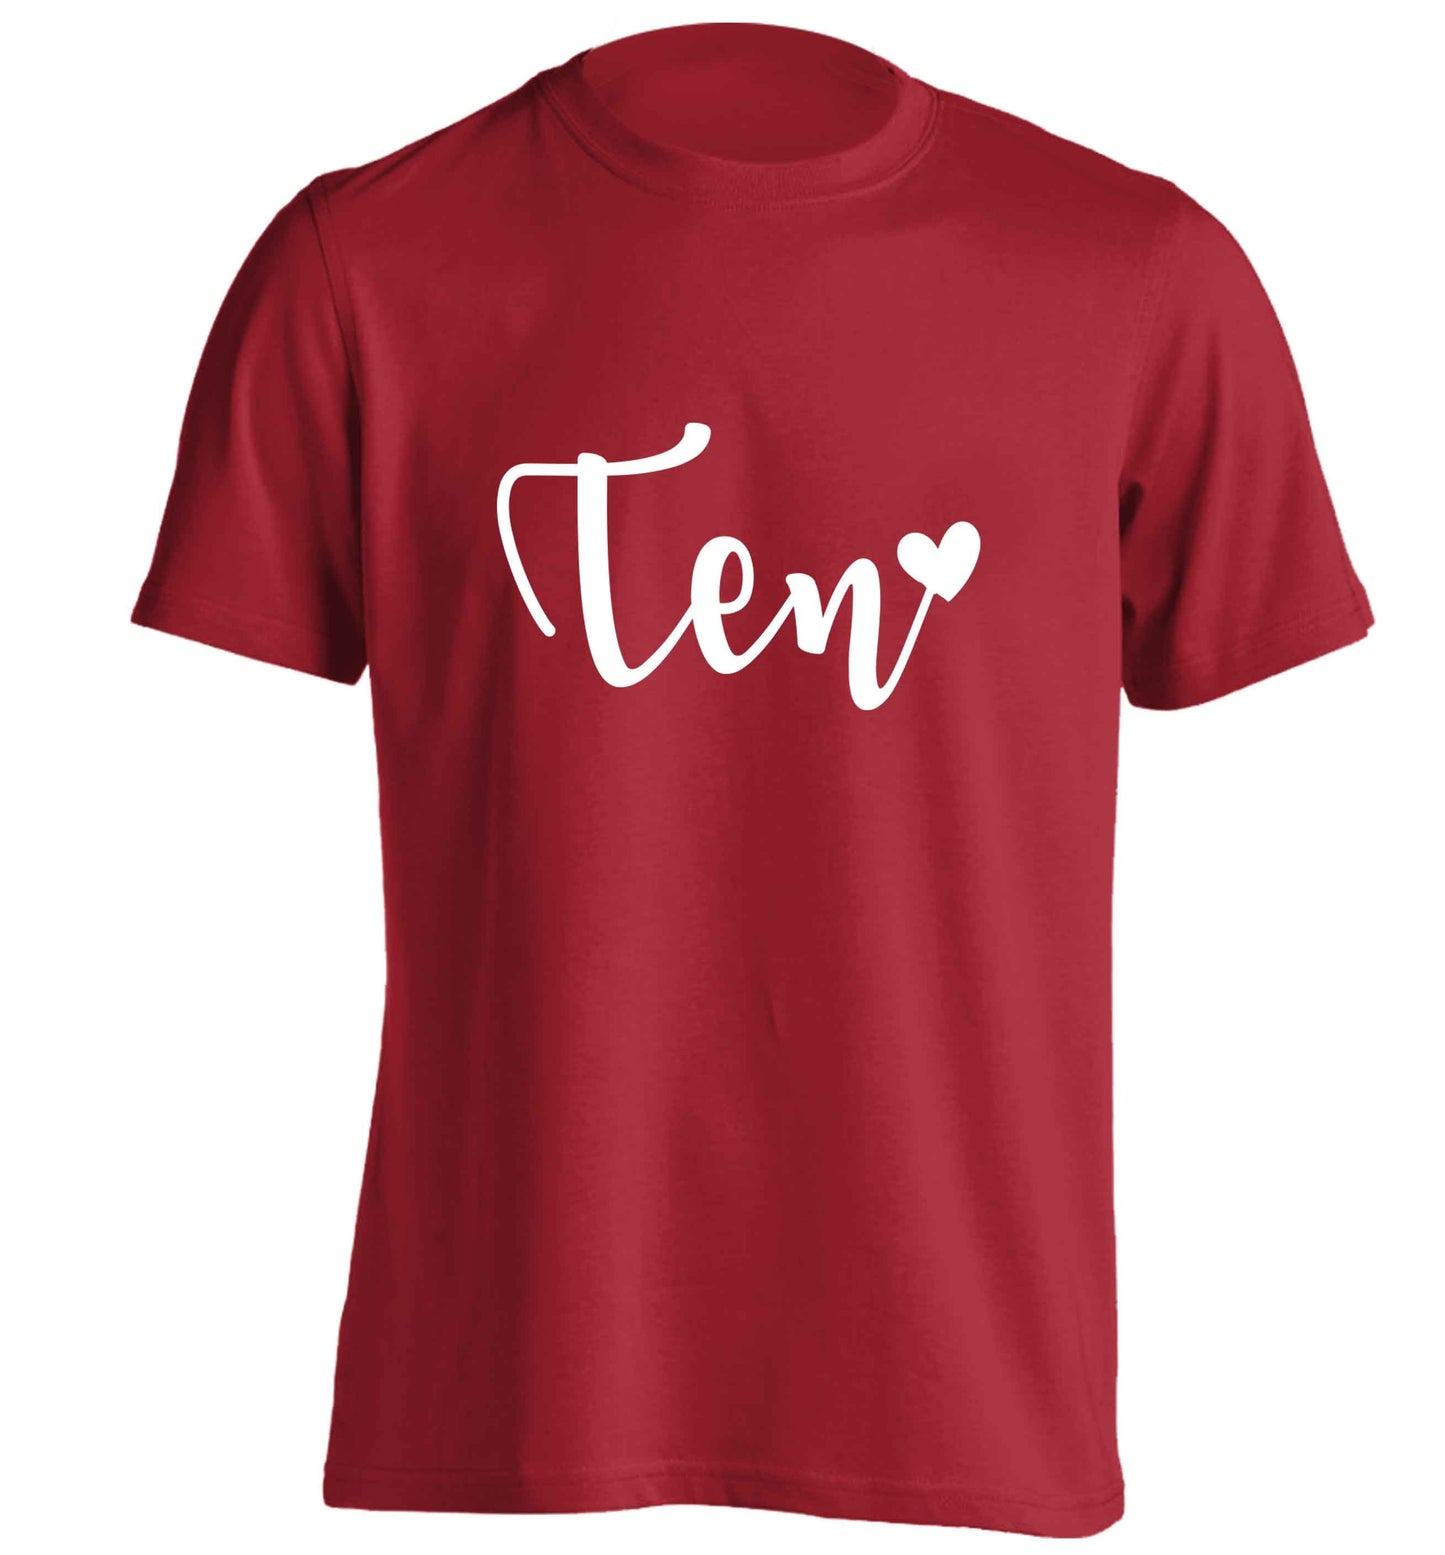 Rose gold eleven adults unisex red Tshirt 2XL